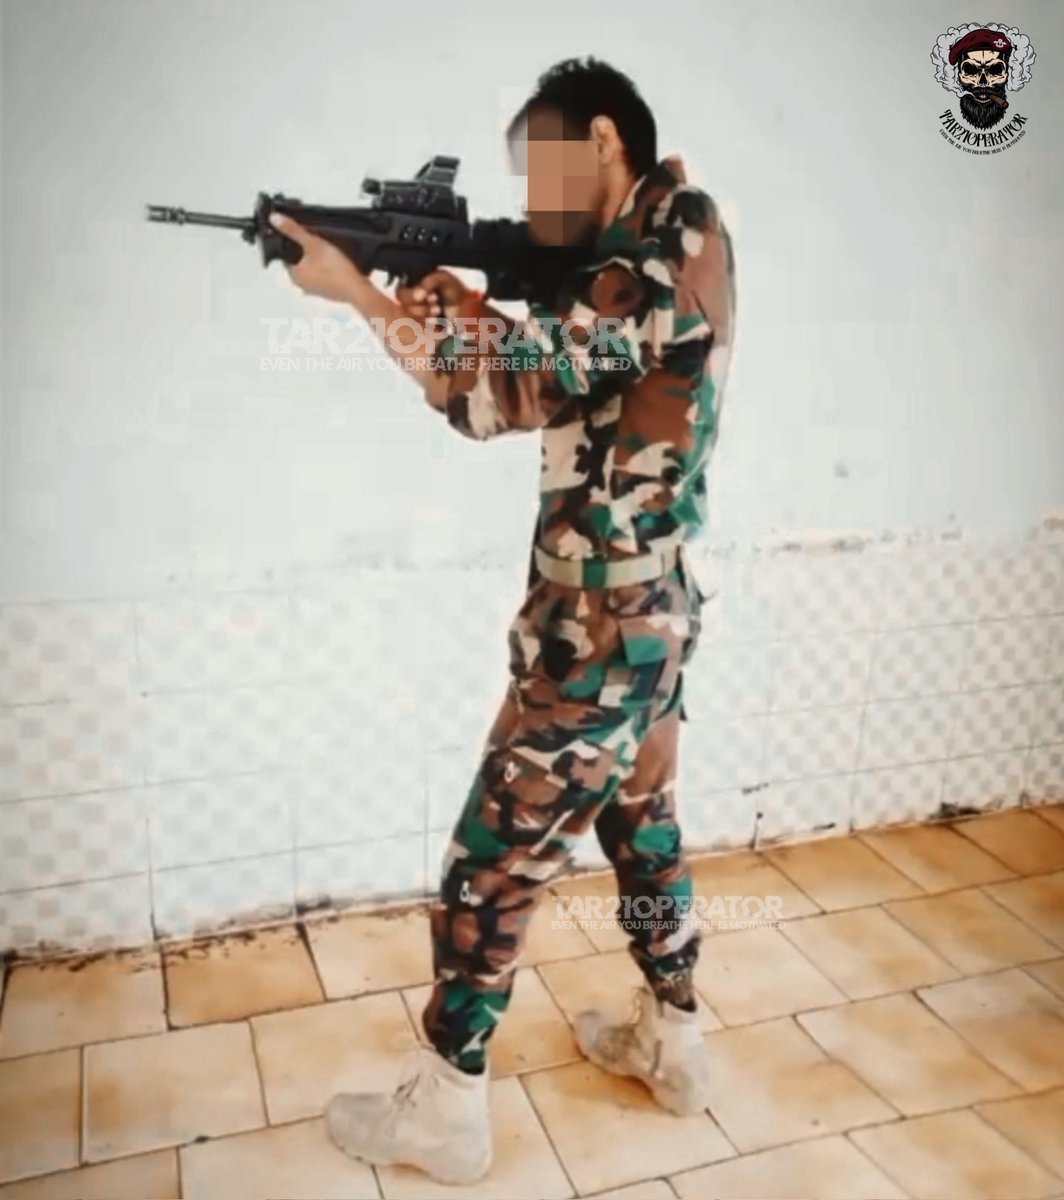 Para Special Forces.. Camobaazi

Tavor TAR-21 with ITL Multi-purpose Aiming Reflex Sight 

#TheDirtyDozen